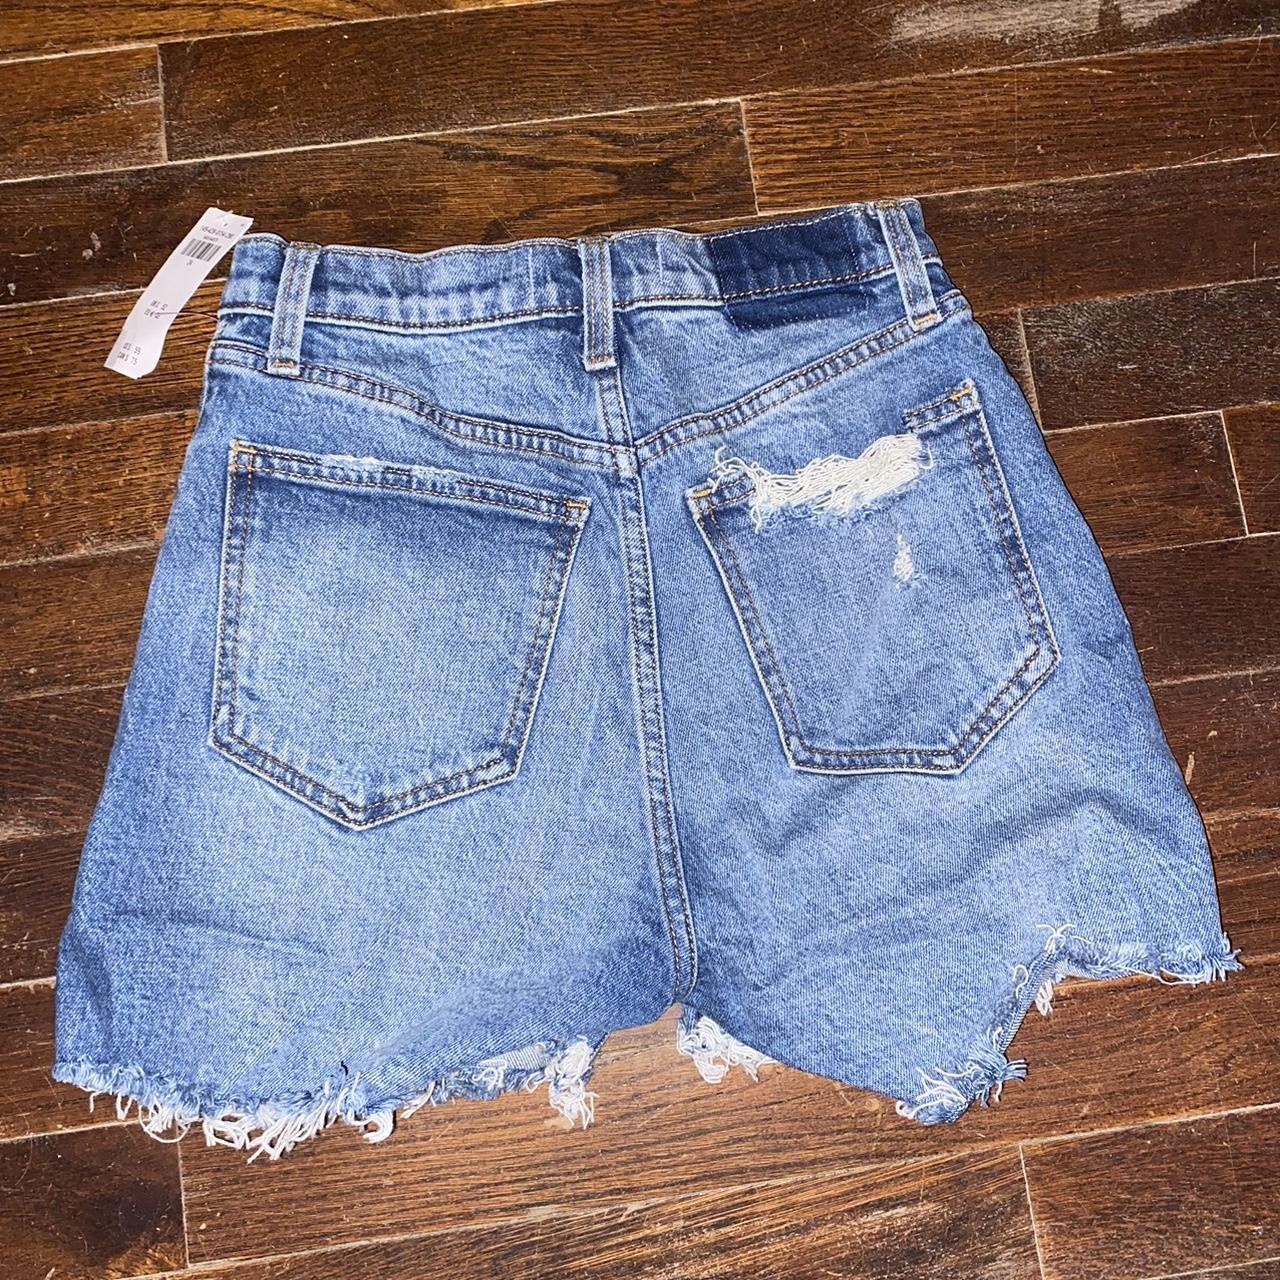 Abercrombie & Fitch Short 24” Brand new - Depop